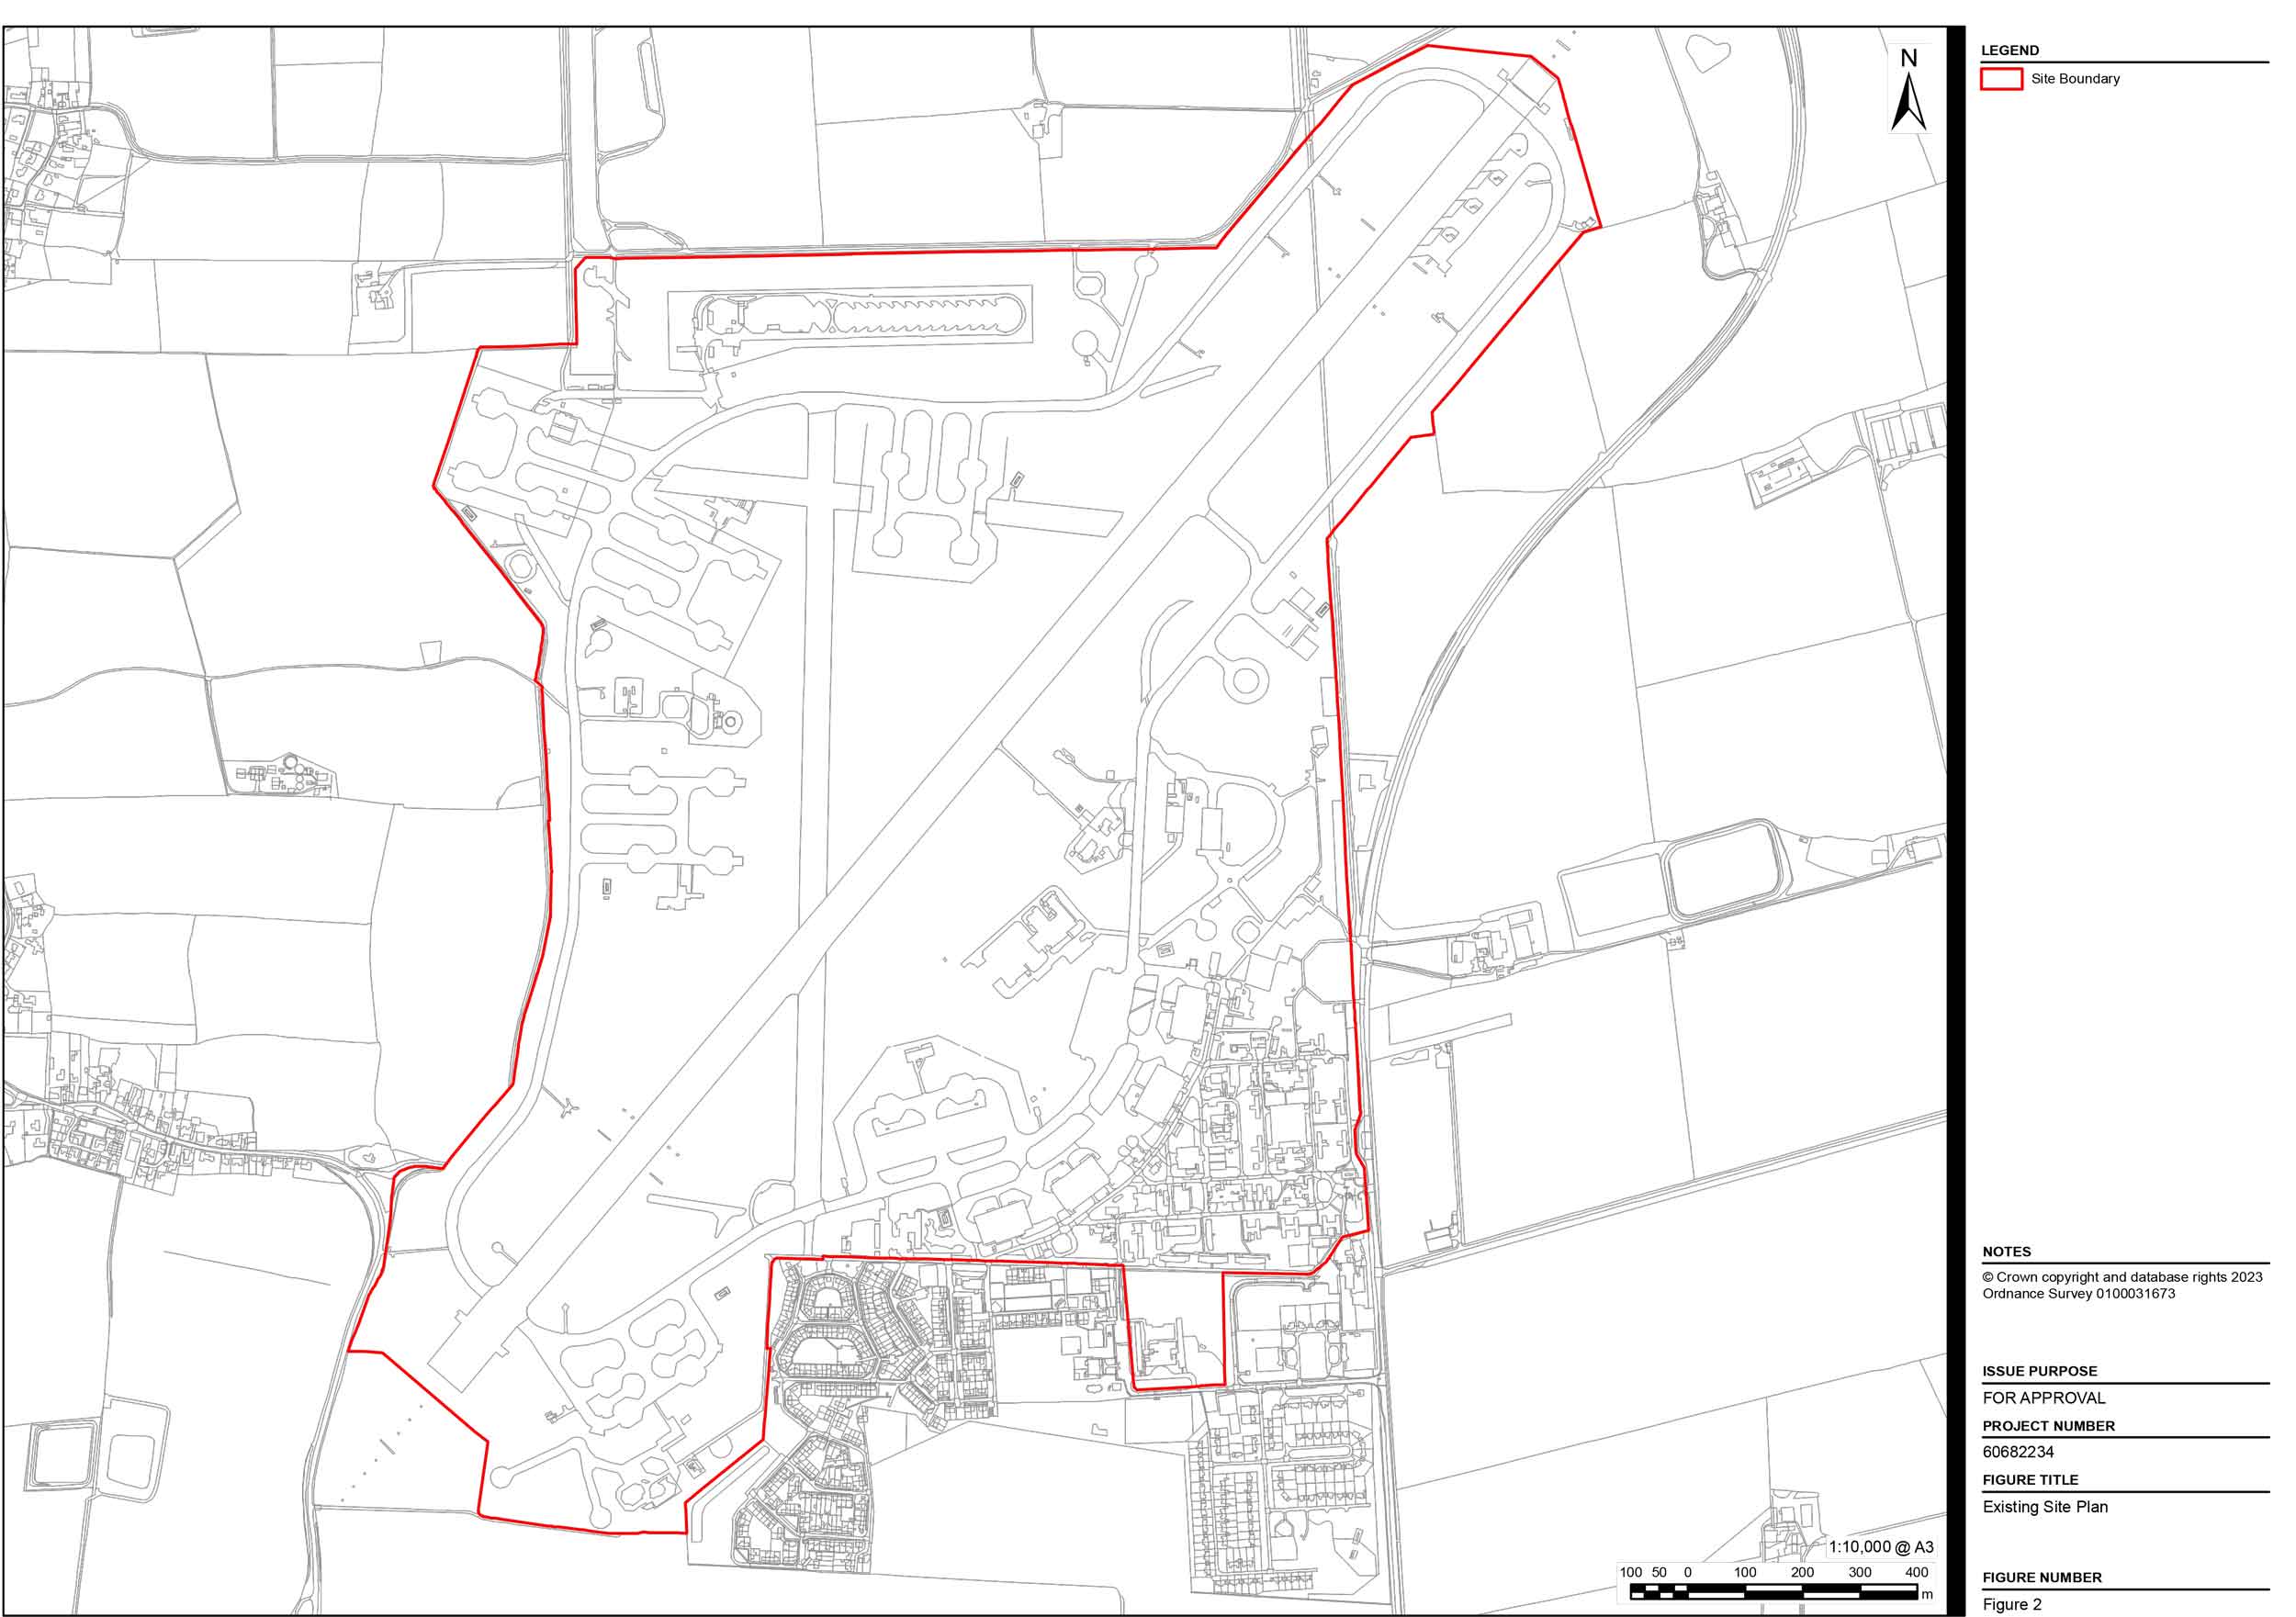 Scampton site plan. Image: Home Office